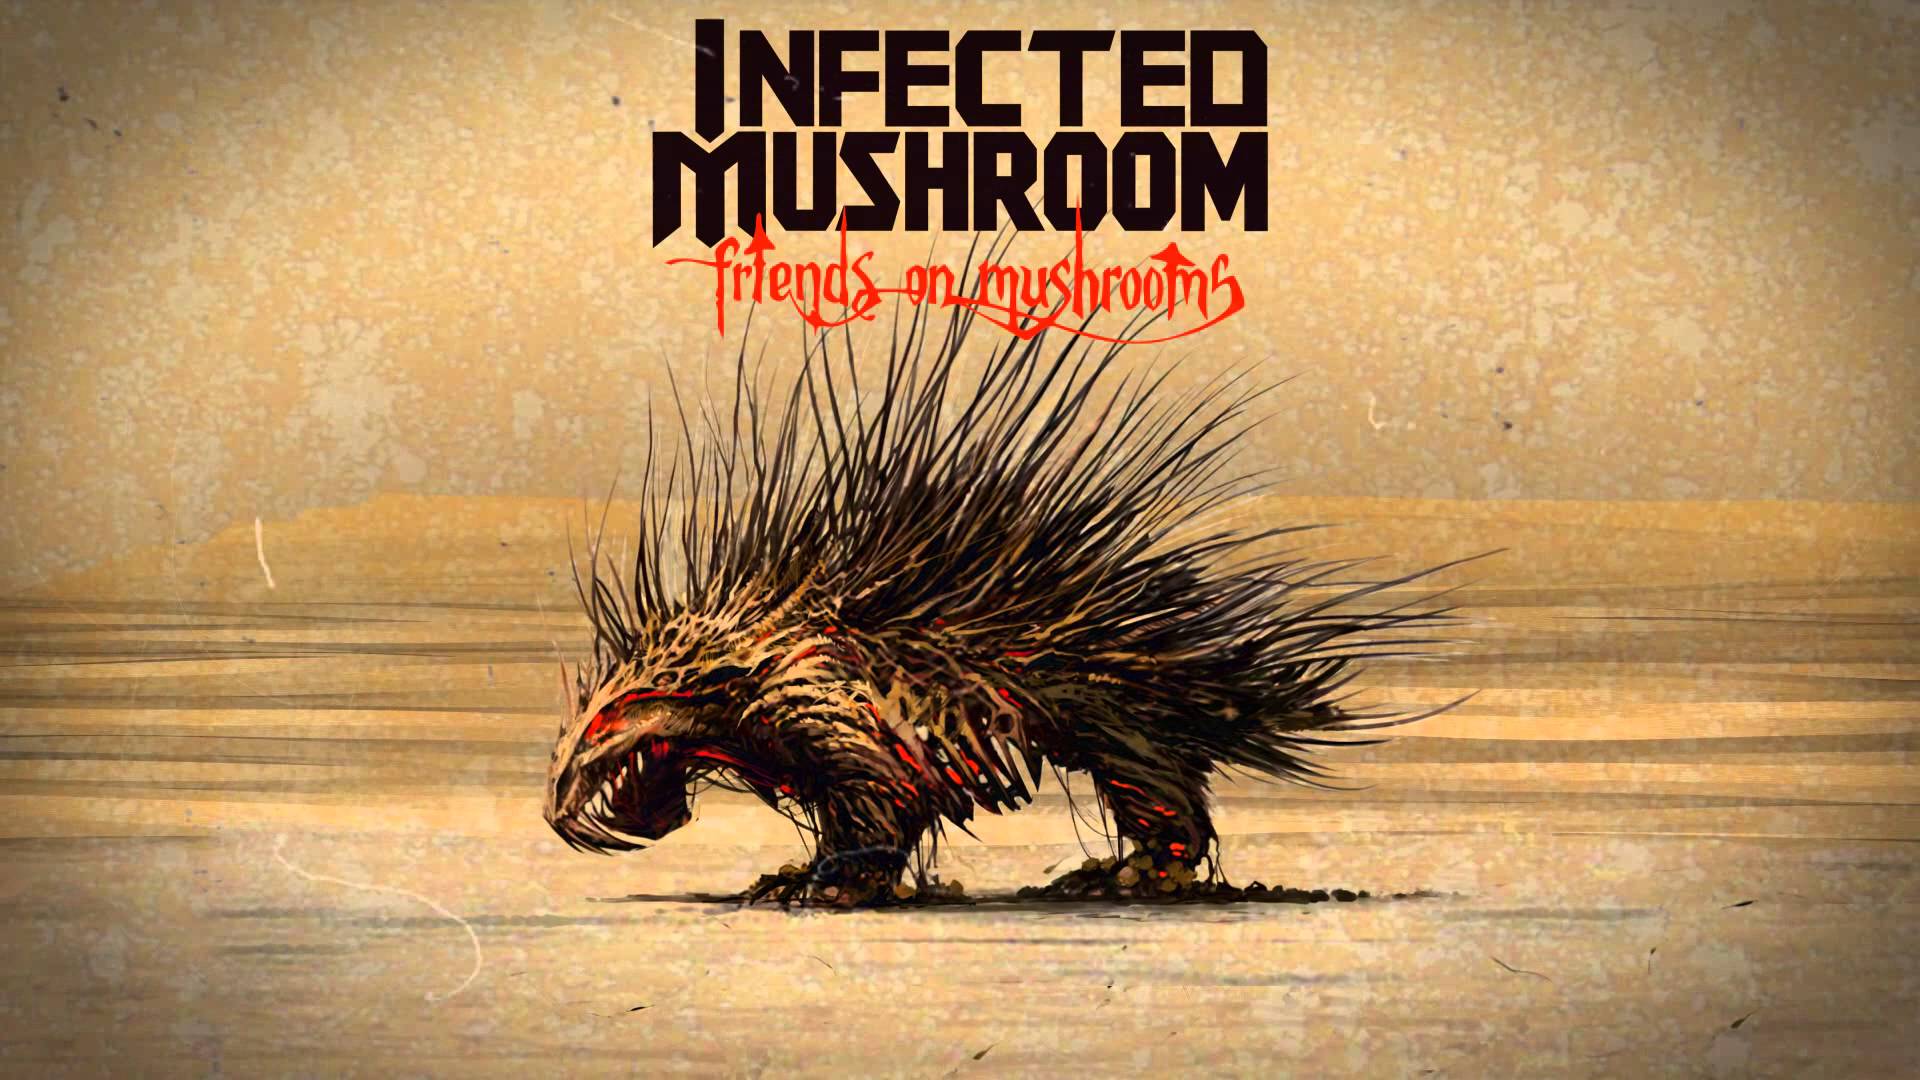 Infected Mushroom Backgrounds, Compatible - PC, Mobile, Gadgets| 1920x1080 px